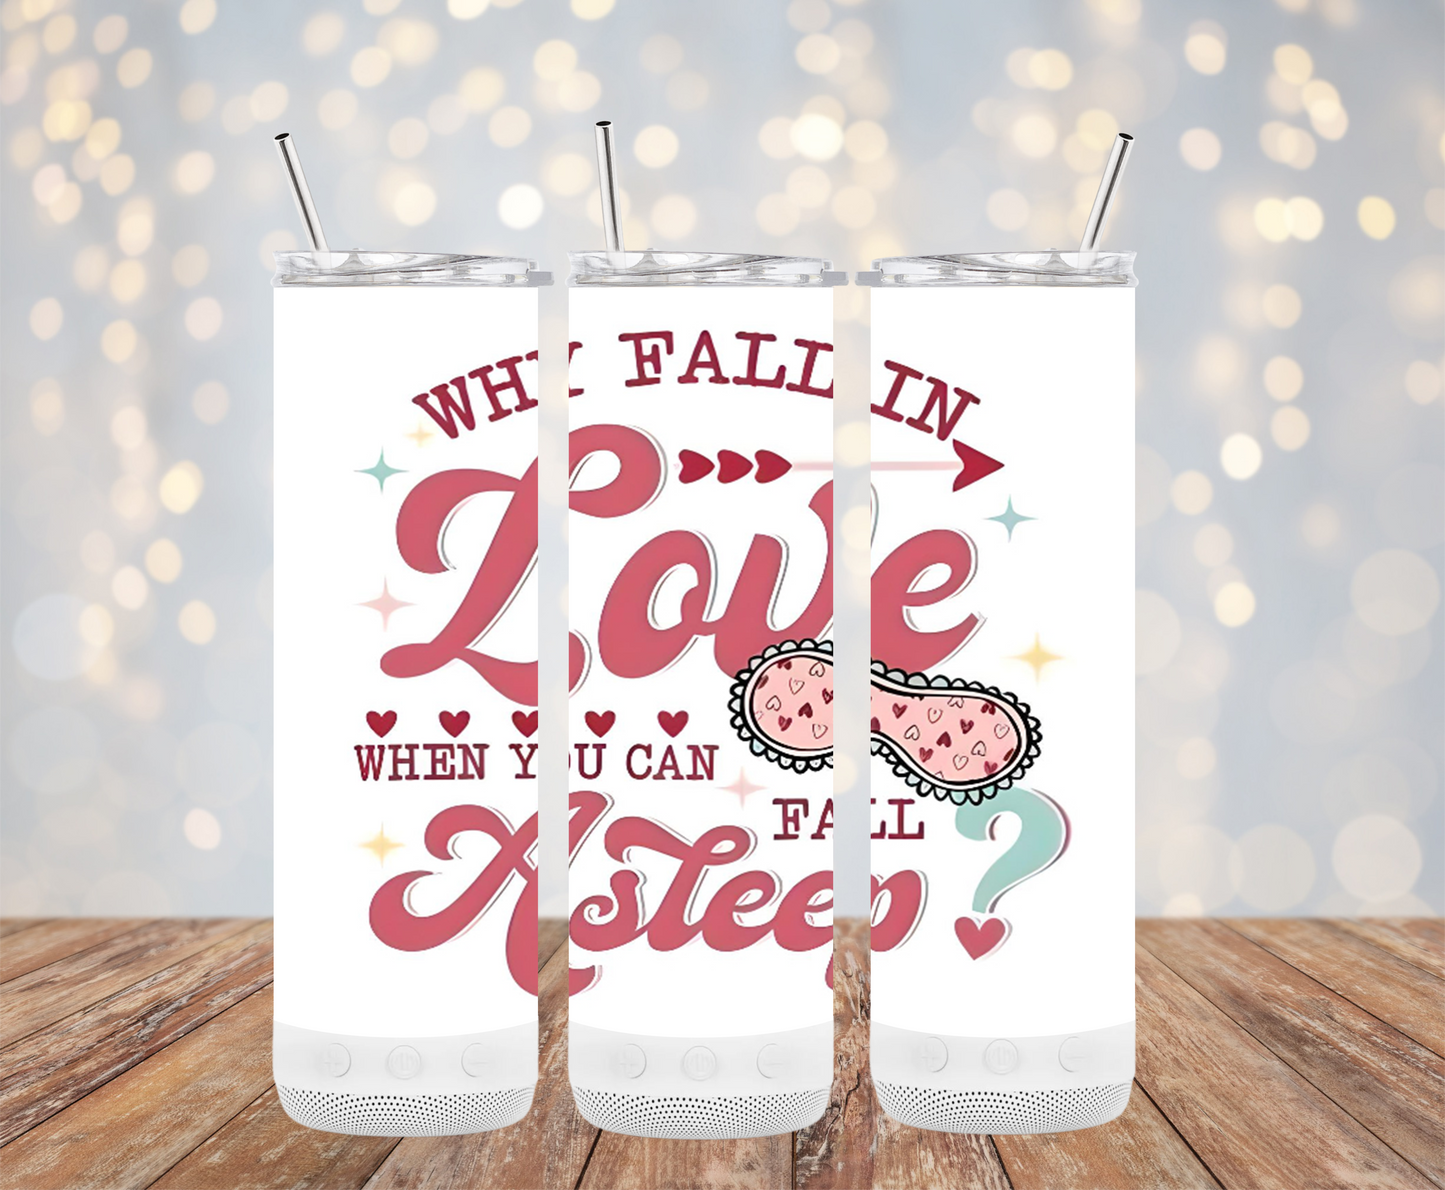 Why Fall in Love When you can Fall Asleep (Valentine Tumbler)